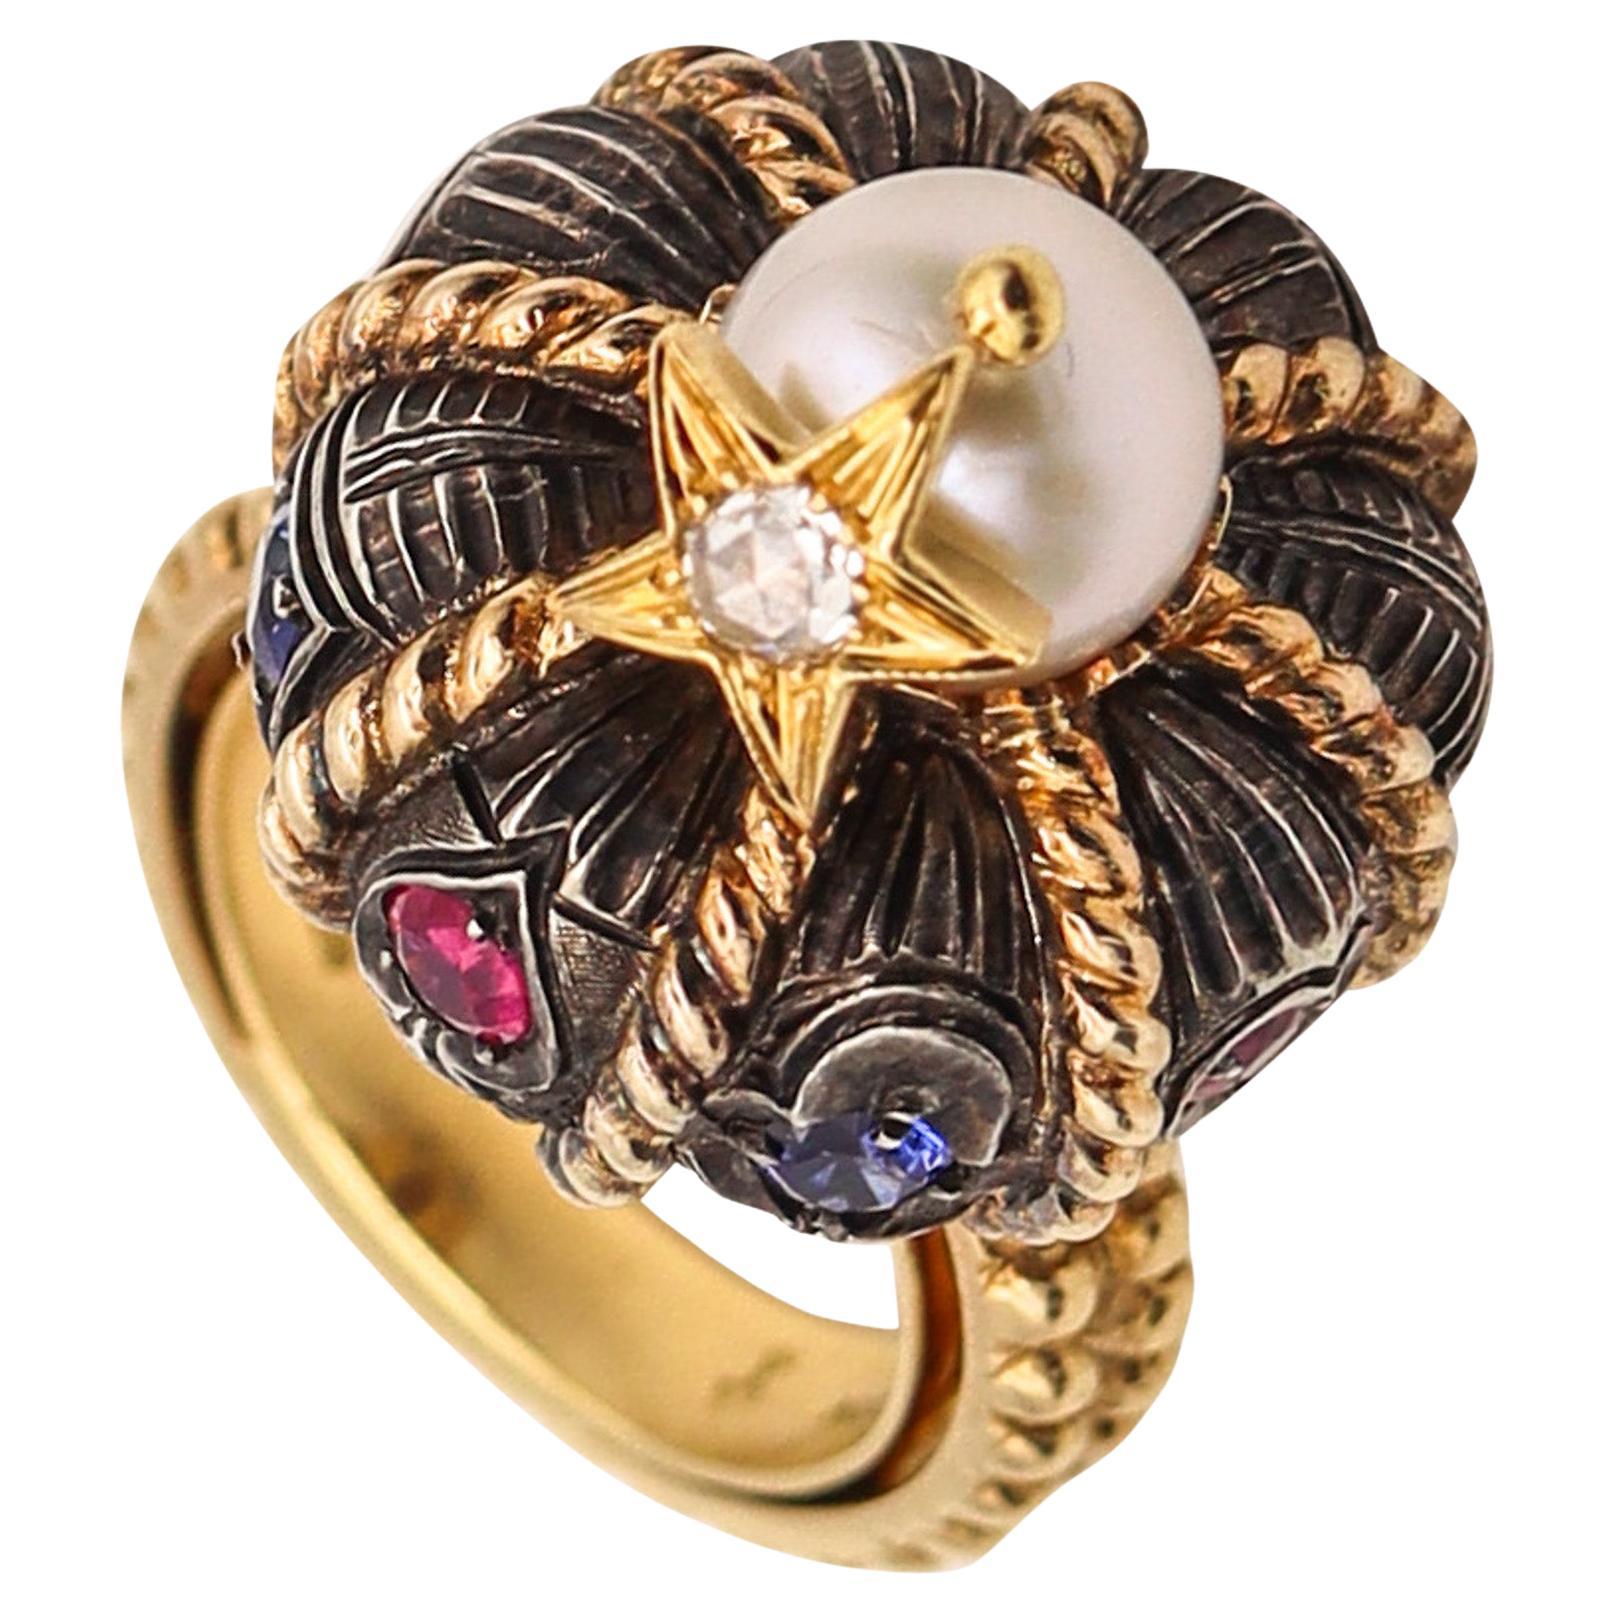 Nardi Venice Unusual Turban Cocktail Ring In 18Kt Gold With Color Gemstones